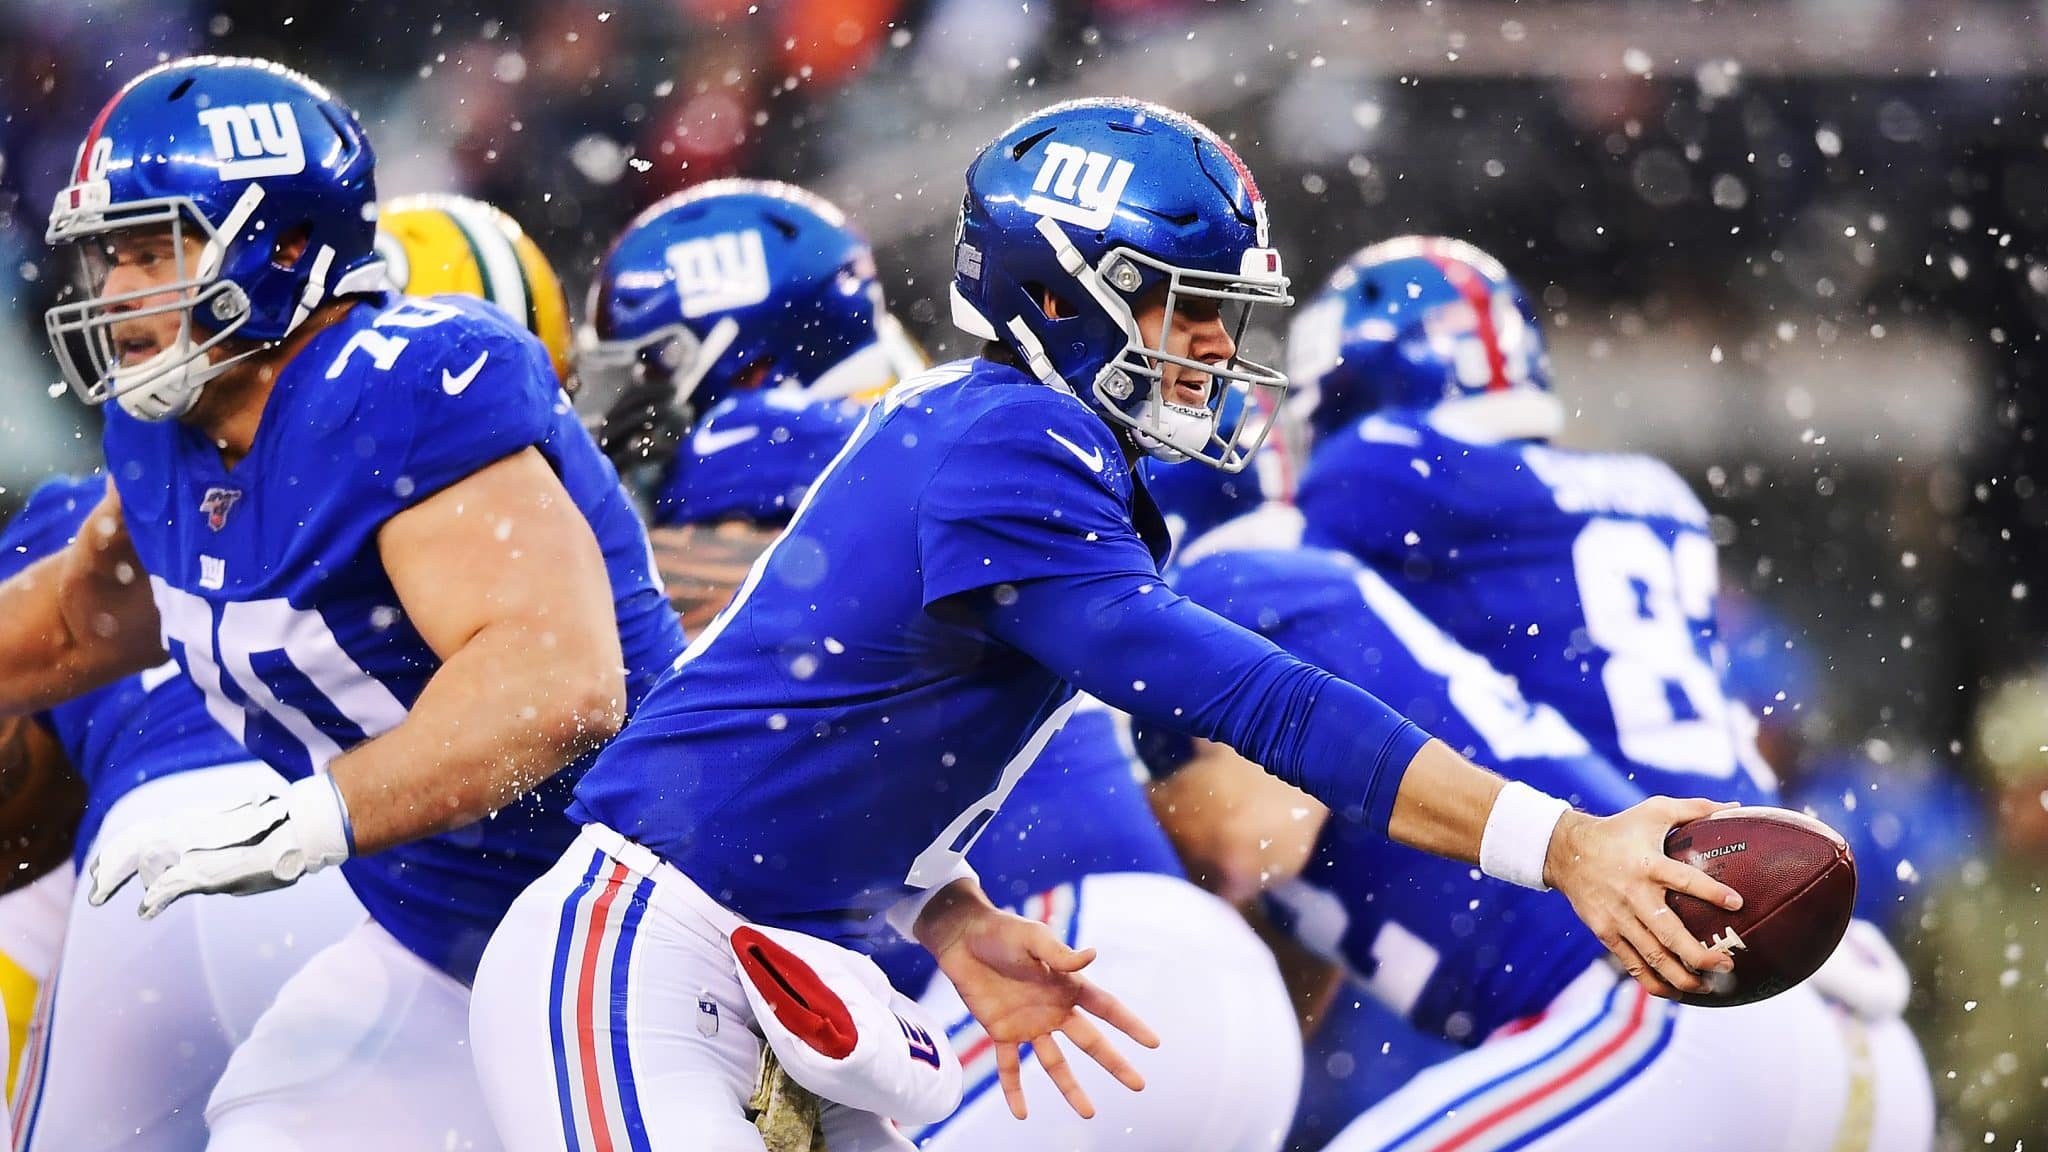 EAST RUTHERFORD, NEW JERSEY - DECEMBER 01: Daniel Jones #8 of the New York Giants hands off the ball during the first half of their game against the Green Bay Packers at MetLife Stadium on December 01, 2019 in East Rutherford, New Jersey..